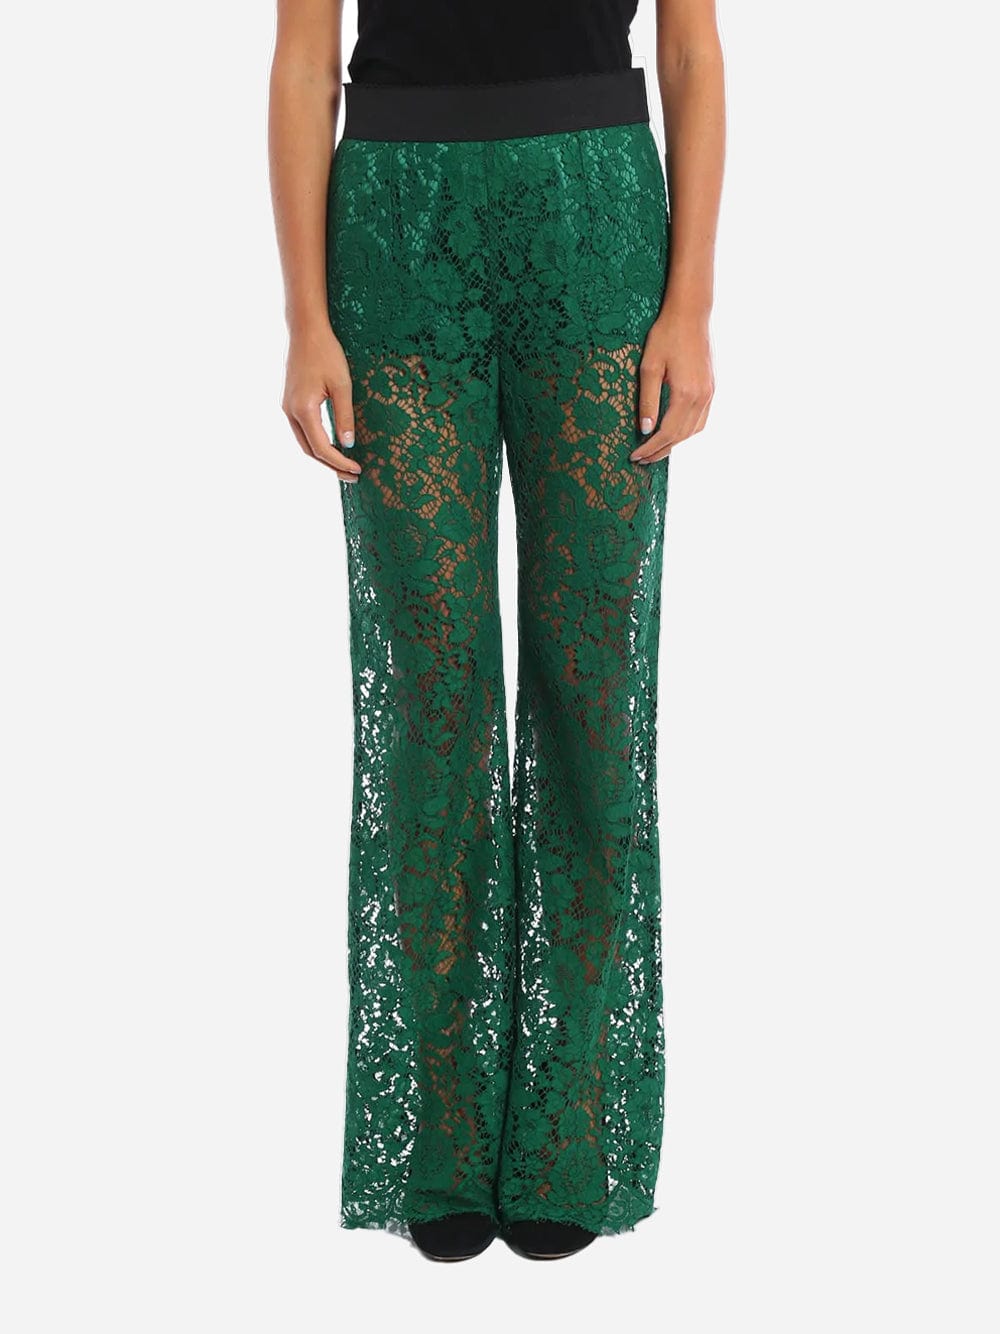 Dolce & Gabbana Floral Lace Palazzo Trousers